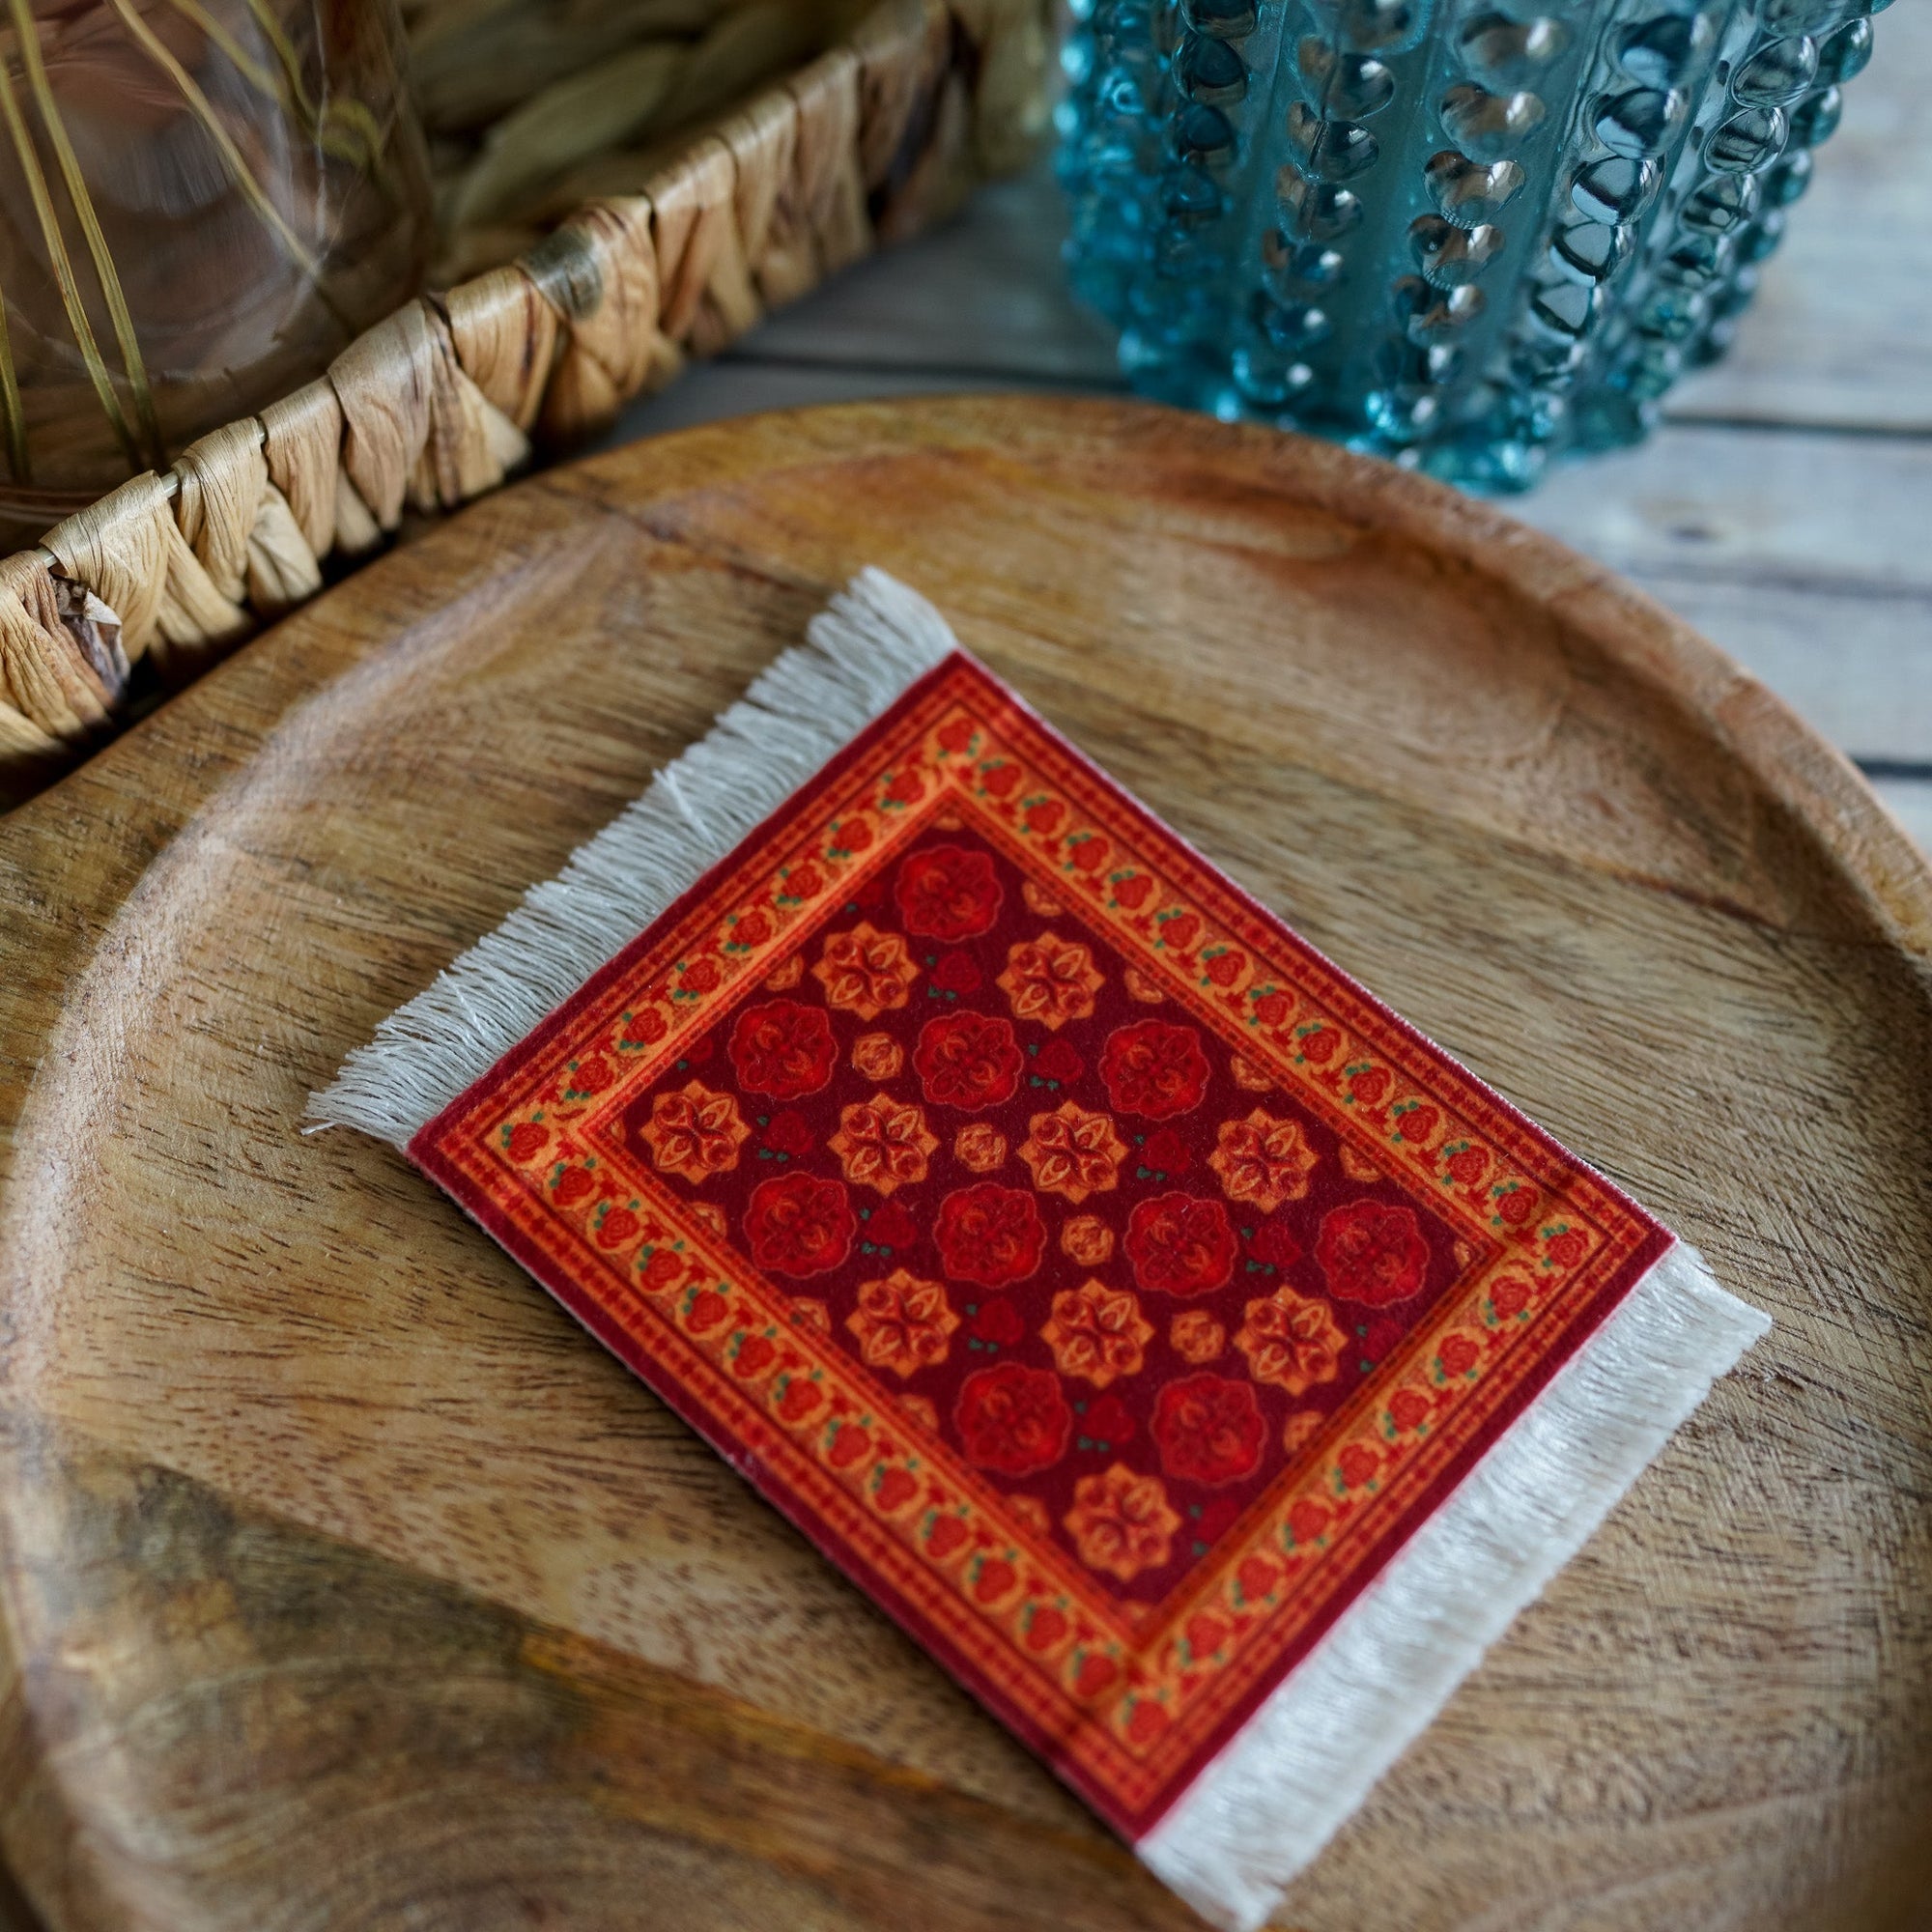 The Wrath and the Dawn Inspired Mug Rug has a red persian rug design and white fringe.